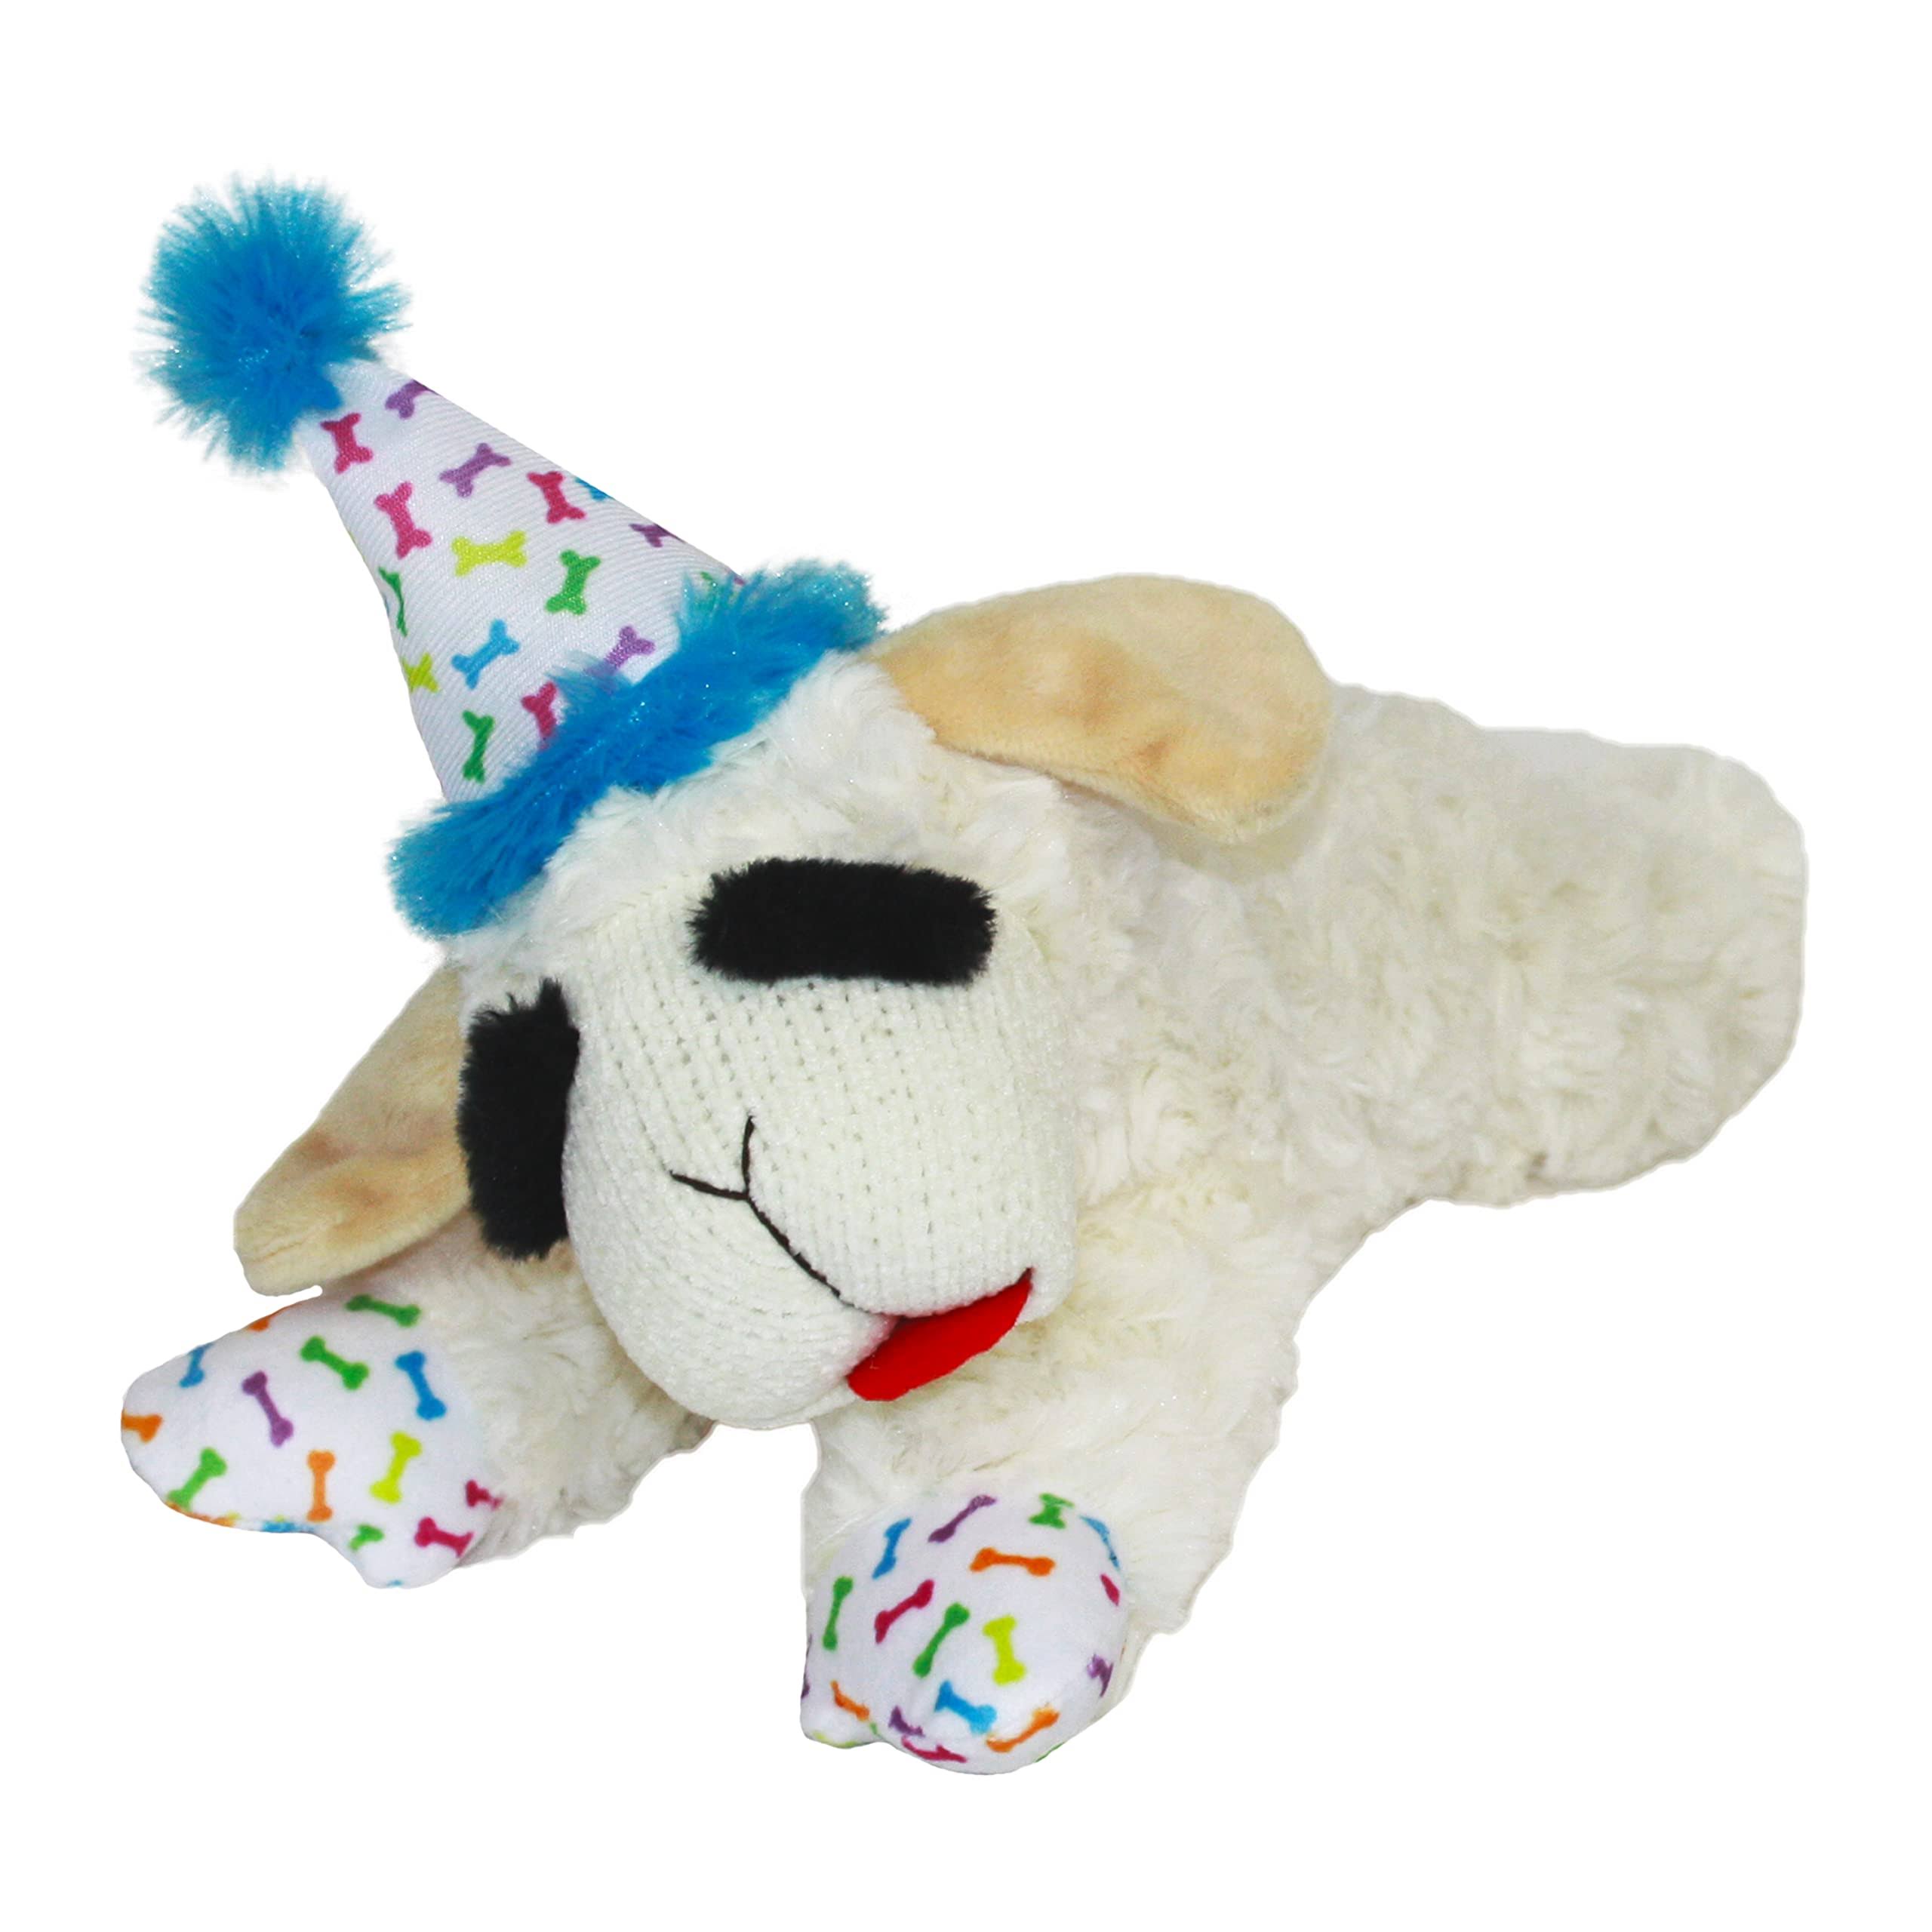 Multipet Lamb Chop Dog Toy with Birthday Hat , Blue, 10.5"